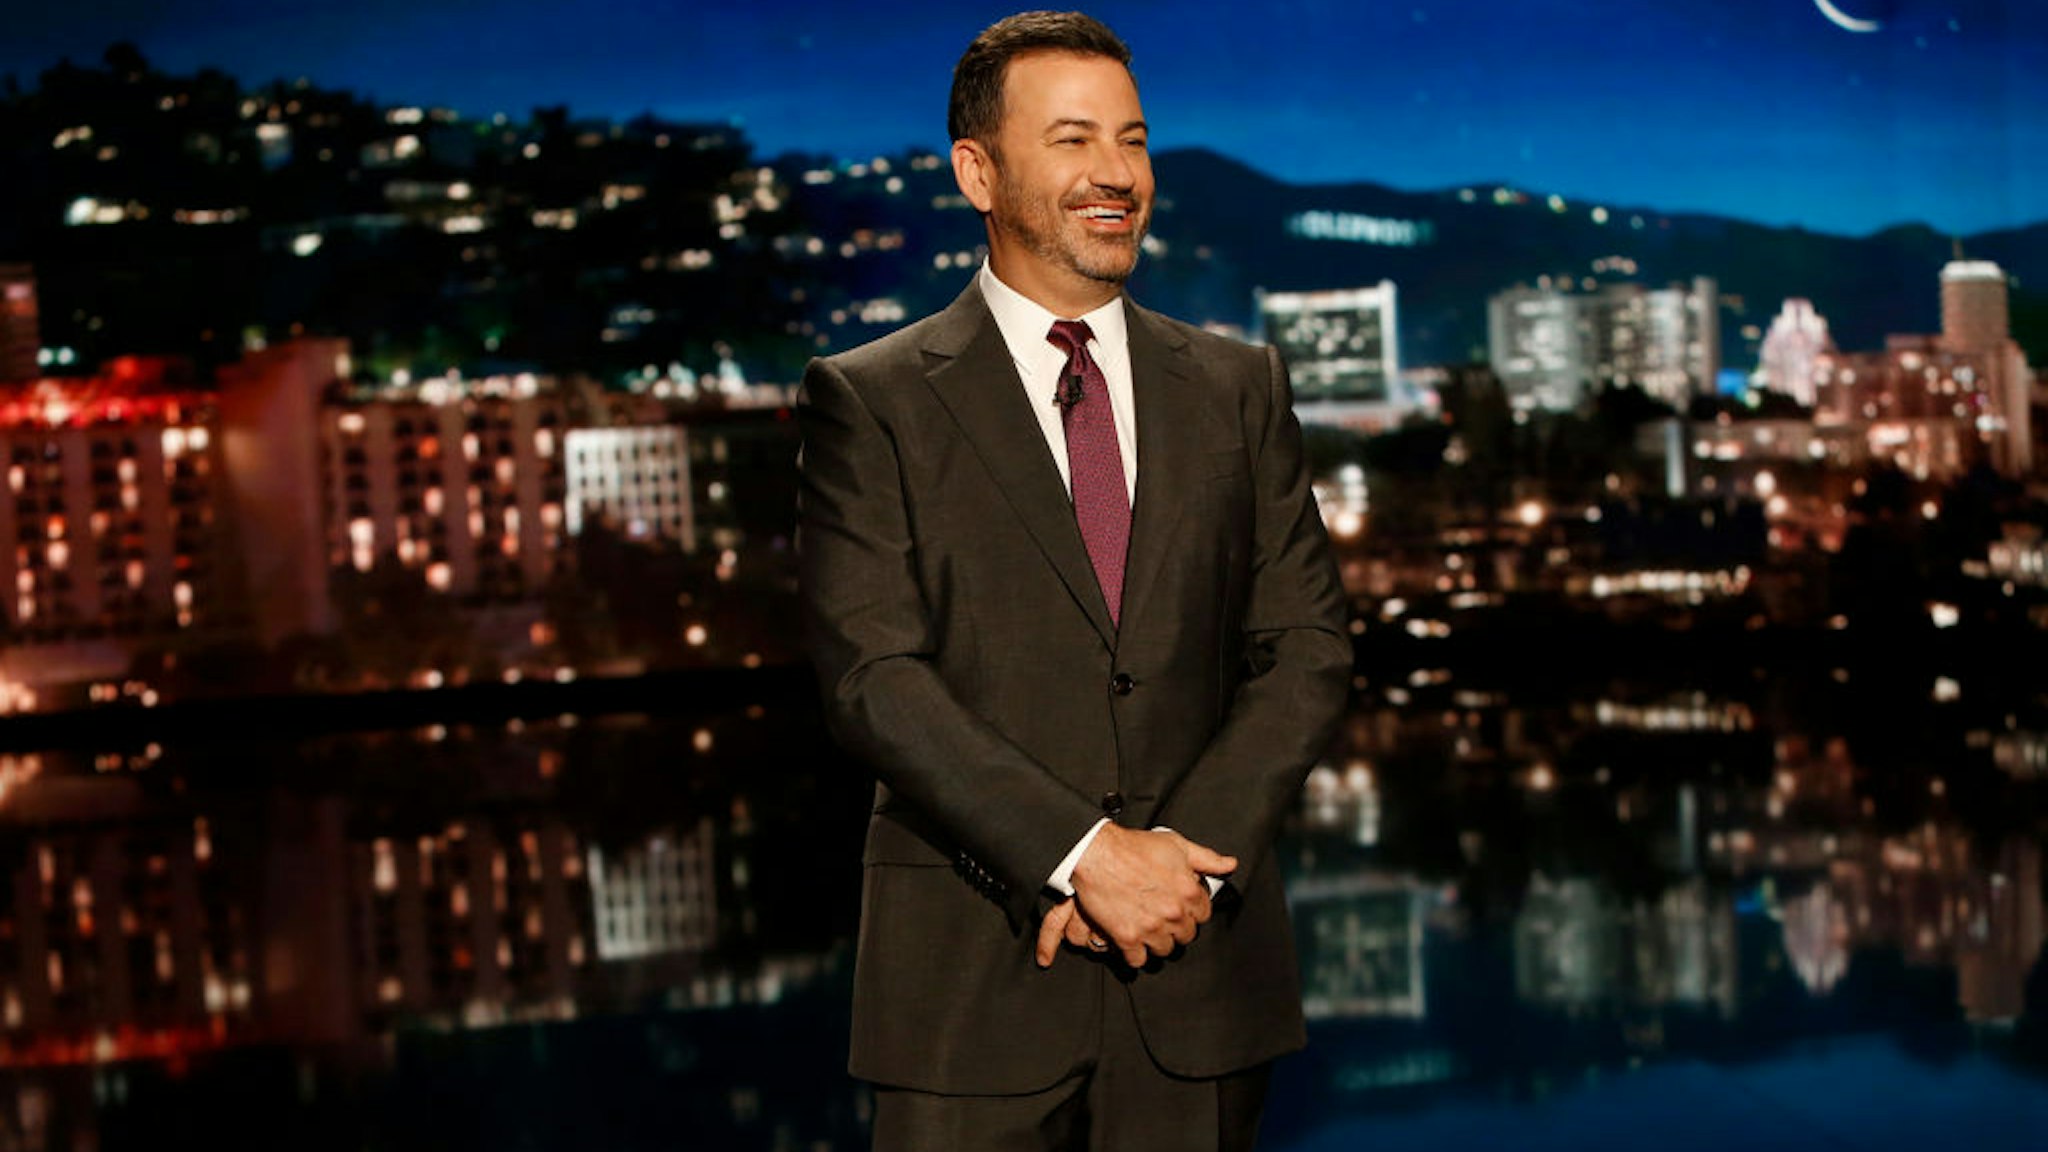 JIMMY KIMMEL LIVE! - "Jimmy Kimmel Live!" airs every weeknight at 11:35 p.m. EDT and features a diverse lineup of guests that include celebrities, athletes, musical acts, comedians and human interest subjects, along with comedy bits and a house band. The guests for Tuesday, July 30, included Kathy Griffin ("Kathy Griffin: A Hell of a Story"), Anthony Davis ("L.A. Lakers"), Hannah Brown ("The Bachelorette"), and musical guest Of Monsters and Men.